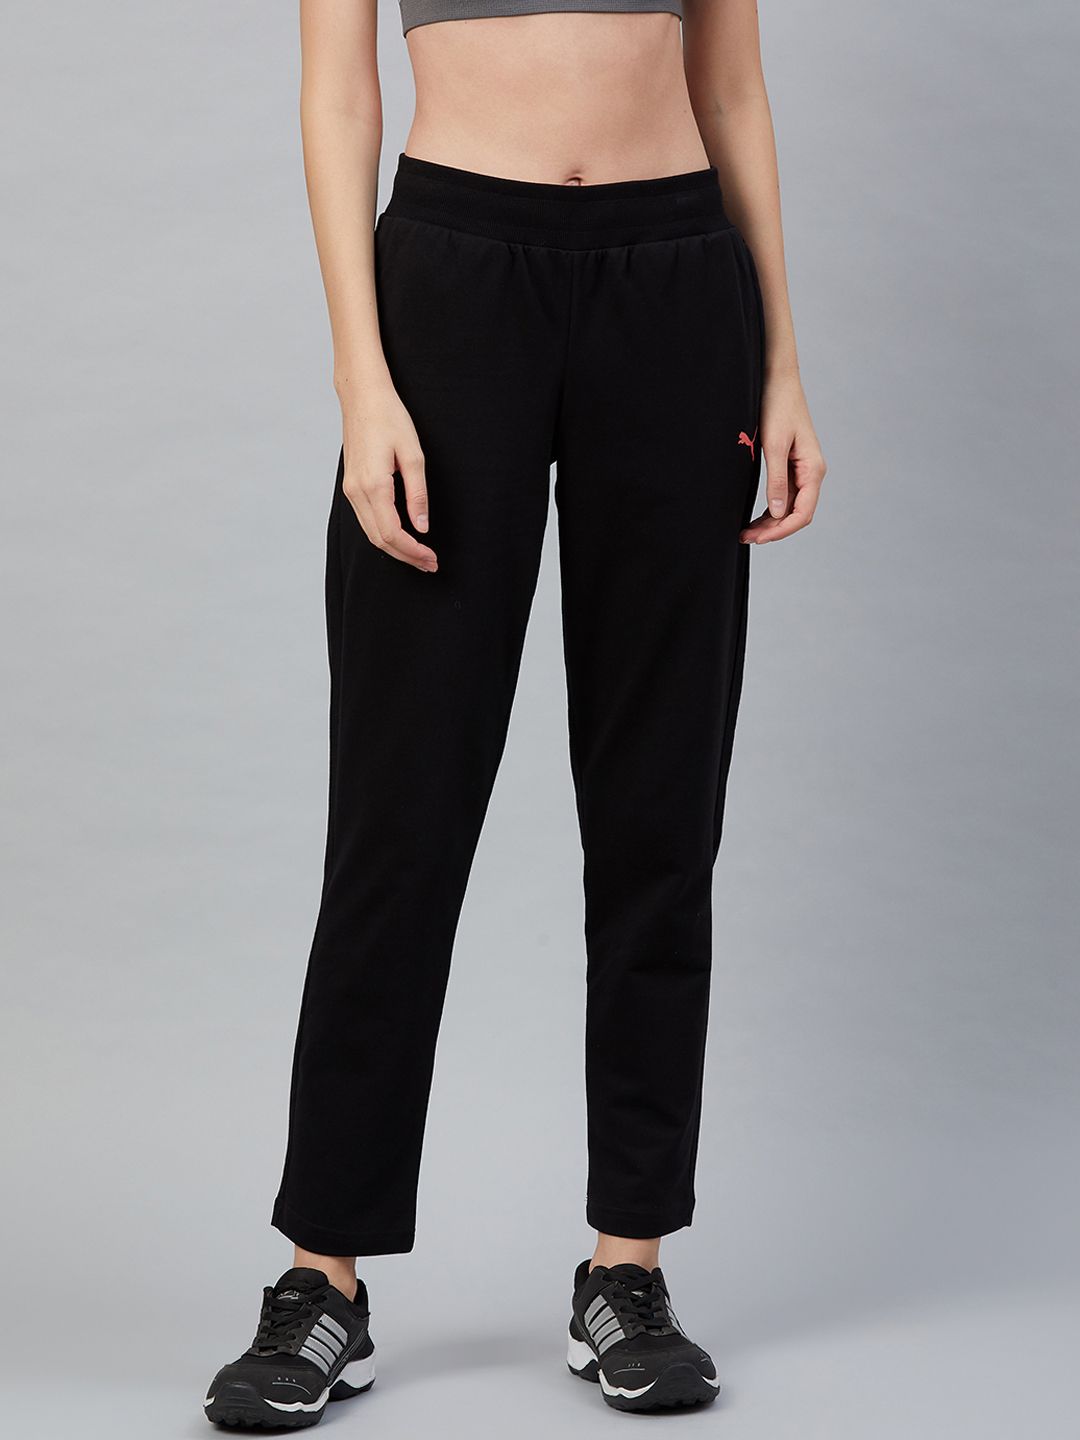 Puma Women Black Graphic 3 Solid Track Pants Price in India